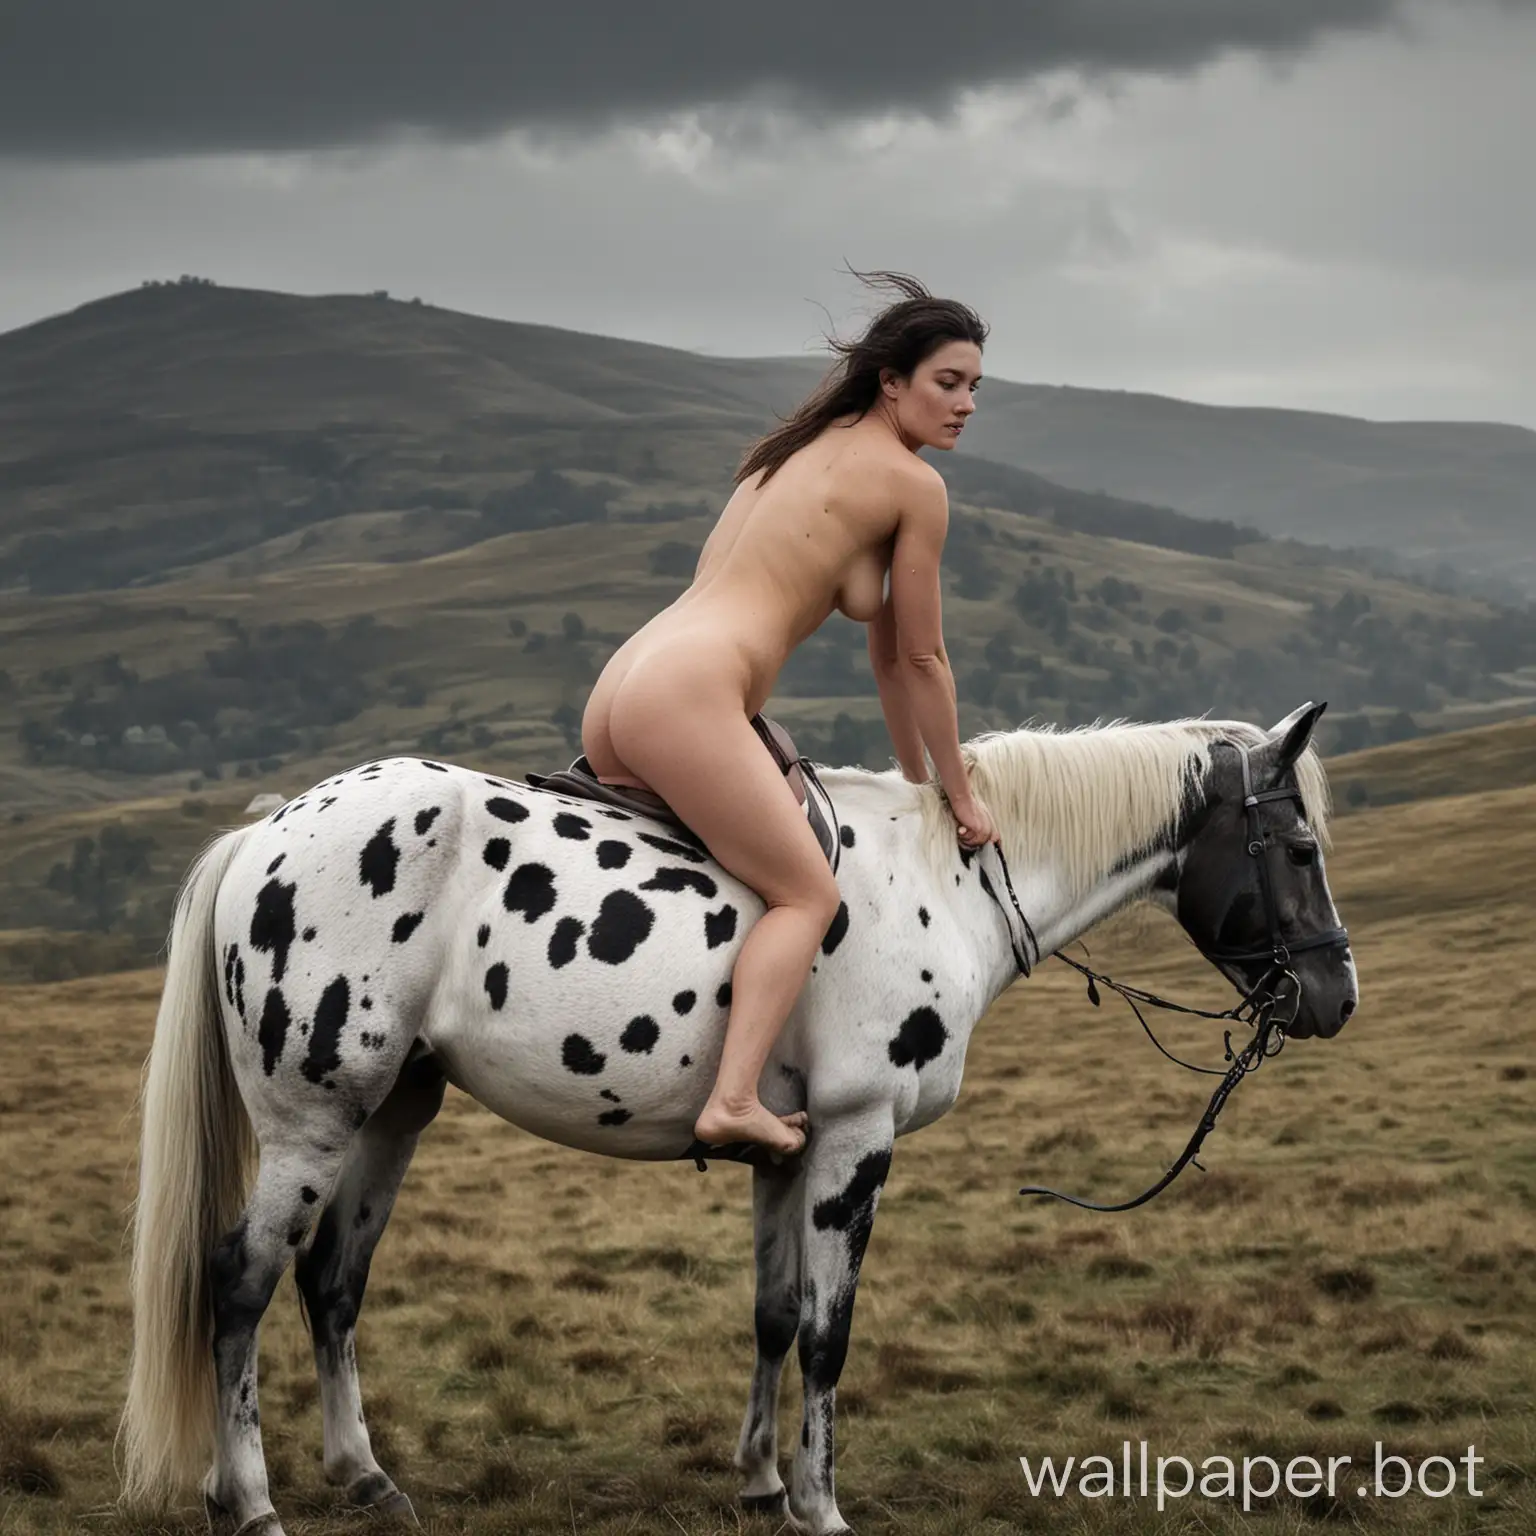 Majestic-Spotted-Horse-Carrying-Nude-Woman-against-Dramatic-Grey-Sky